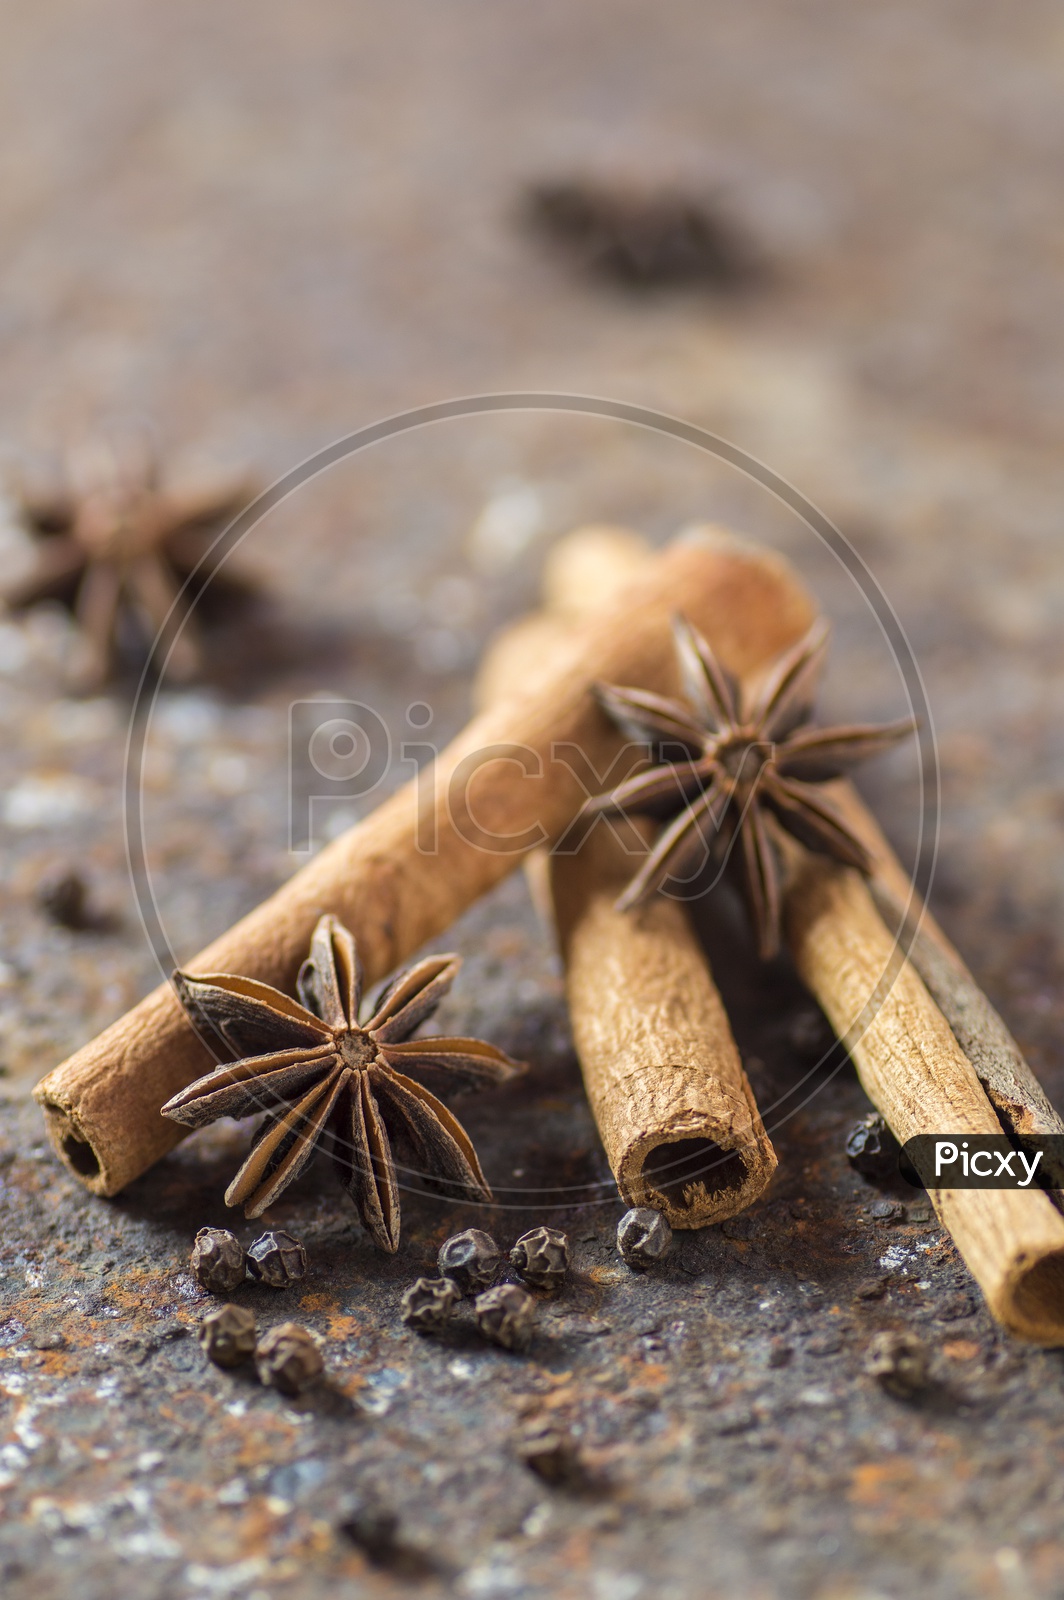 Stick Cinnamon With  Star Anise